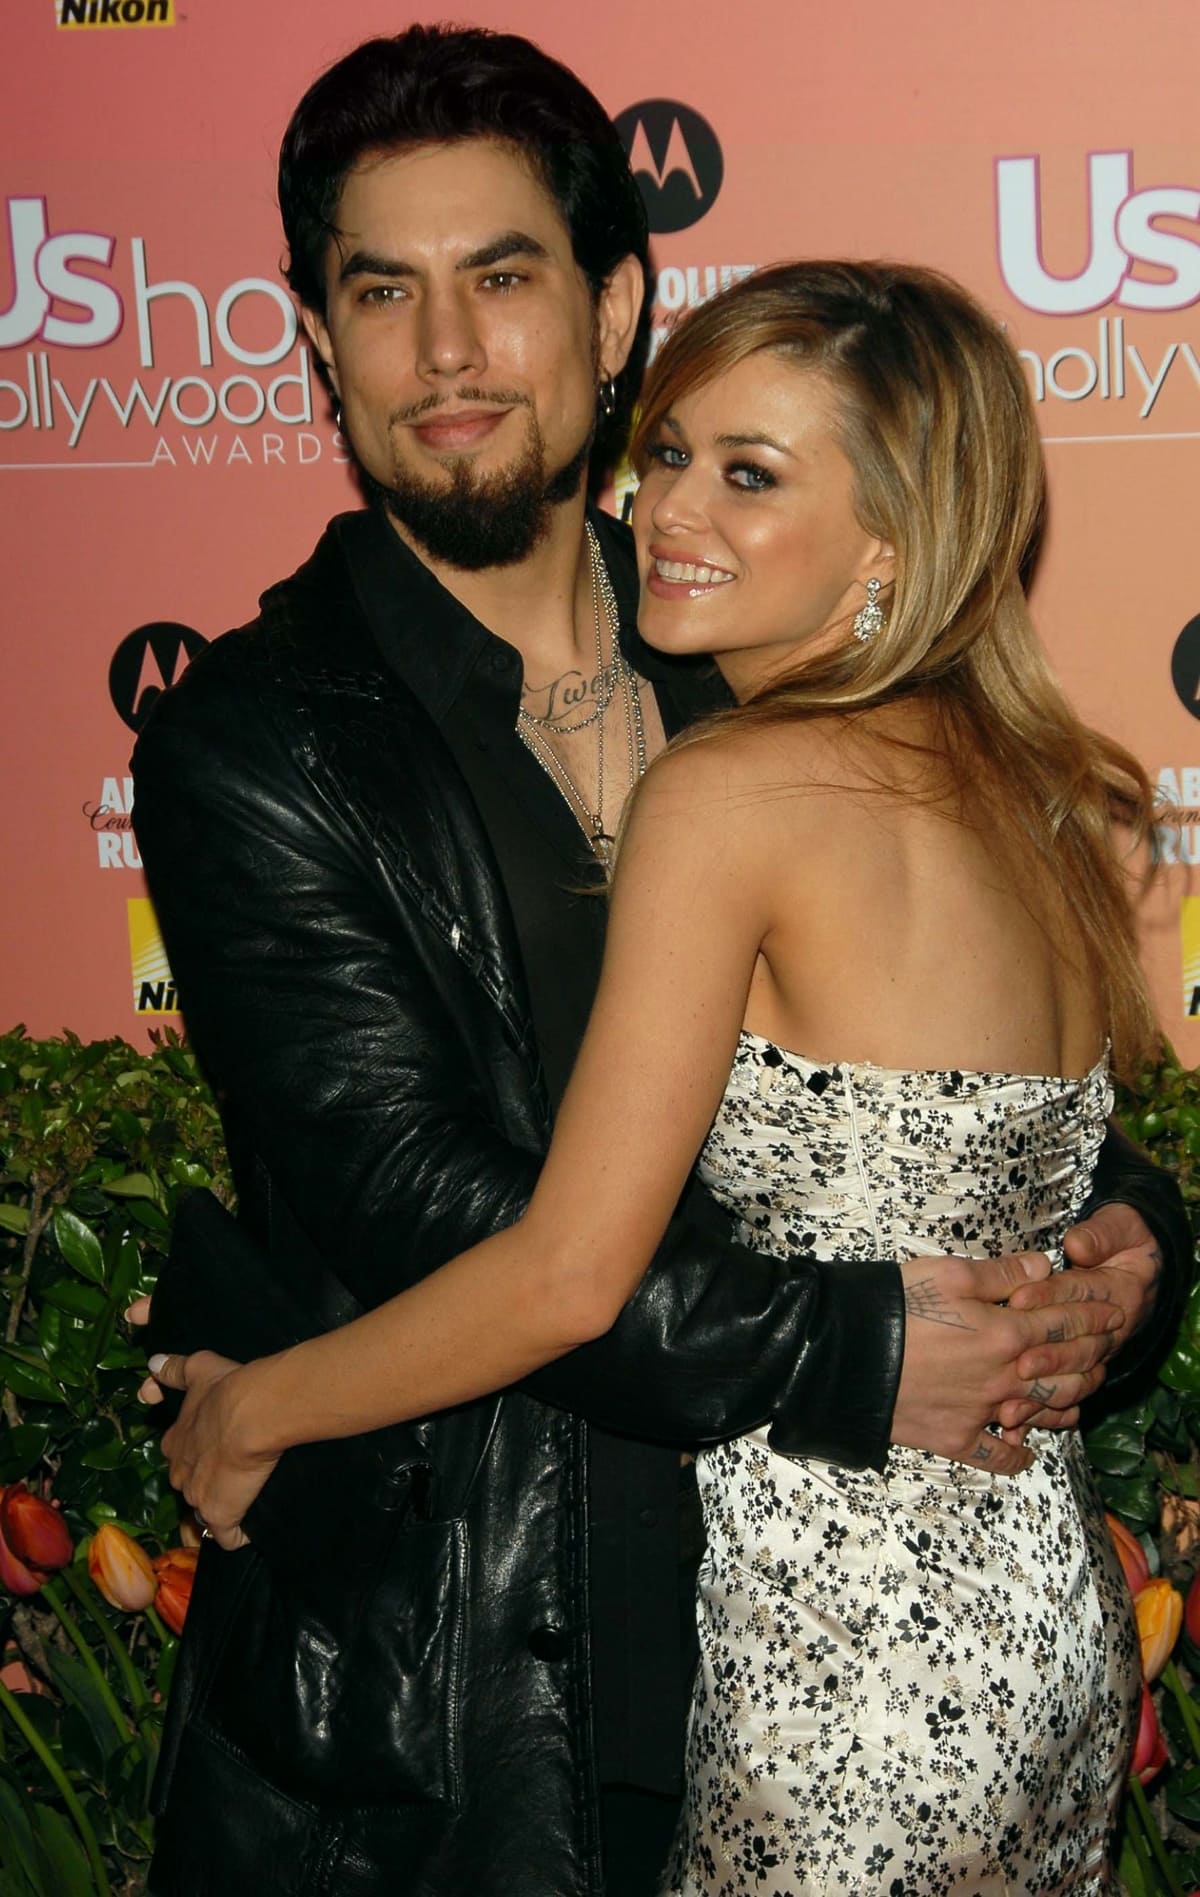 Dave Navarro and Carmen Electra met on a blind date arranged by a friend, married in 2004, and divorced in 2007